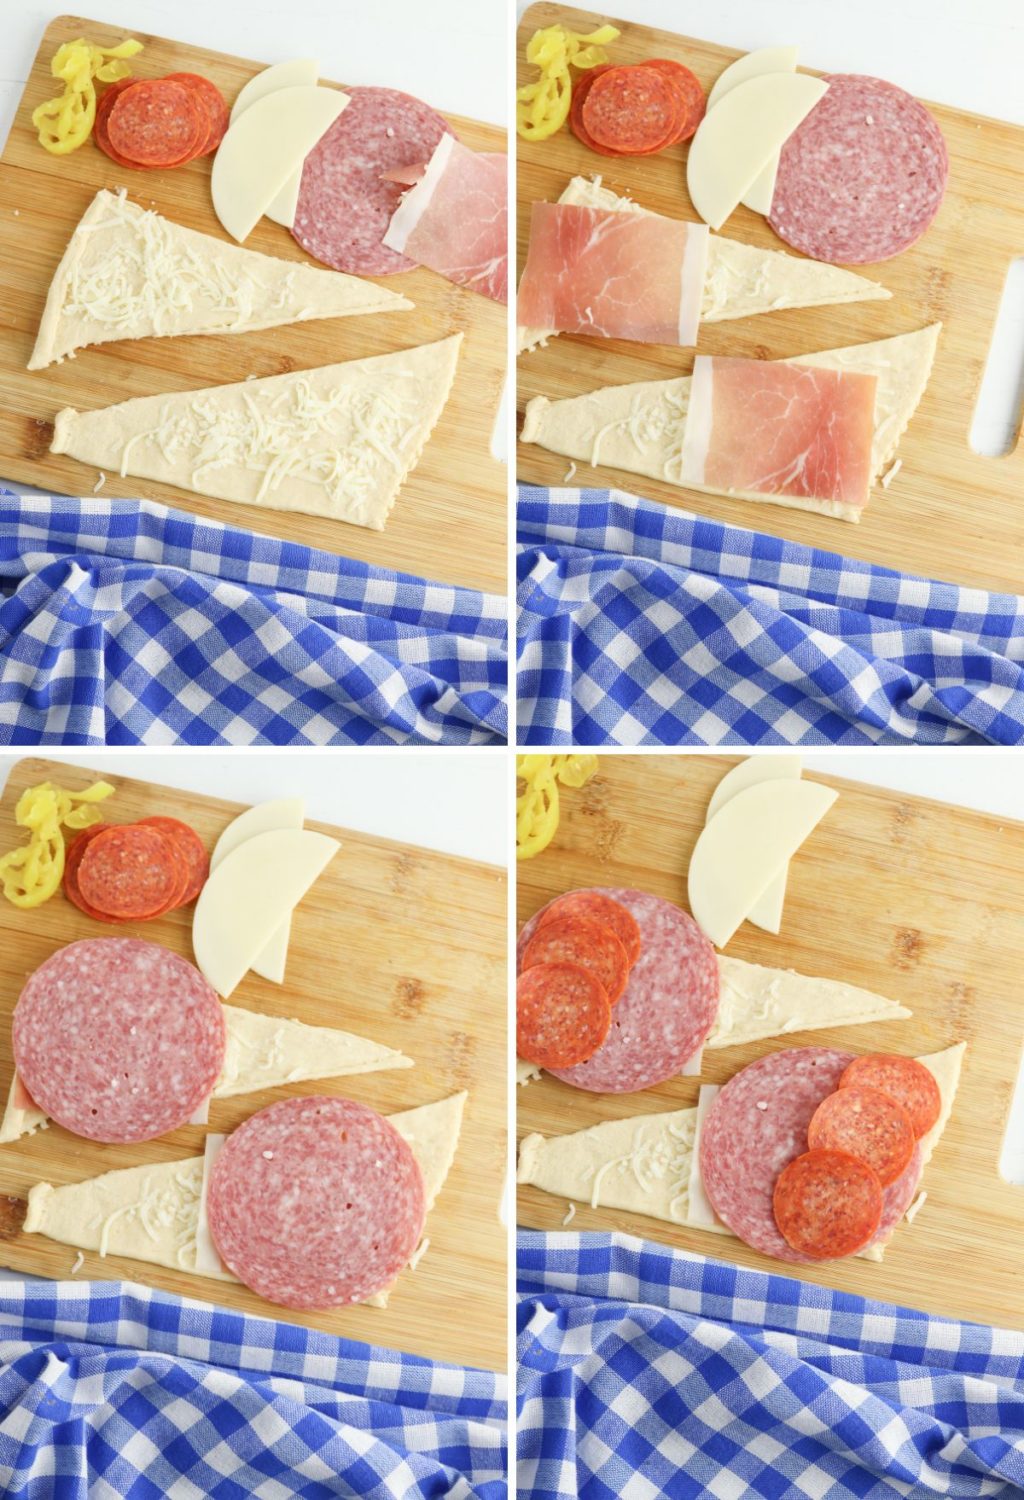 A series of photos showing different cuts of meat and cheese on a cutting board.